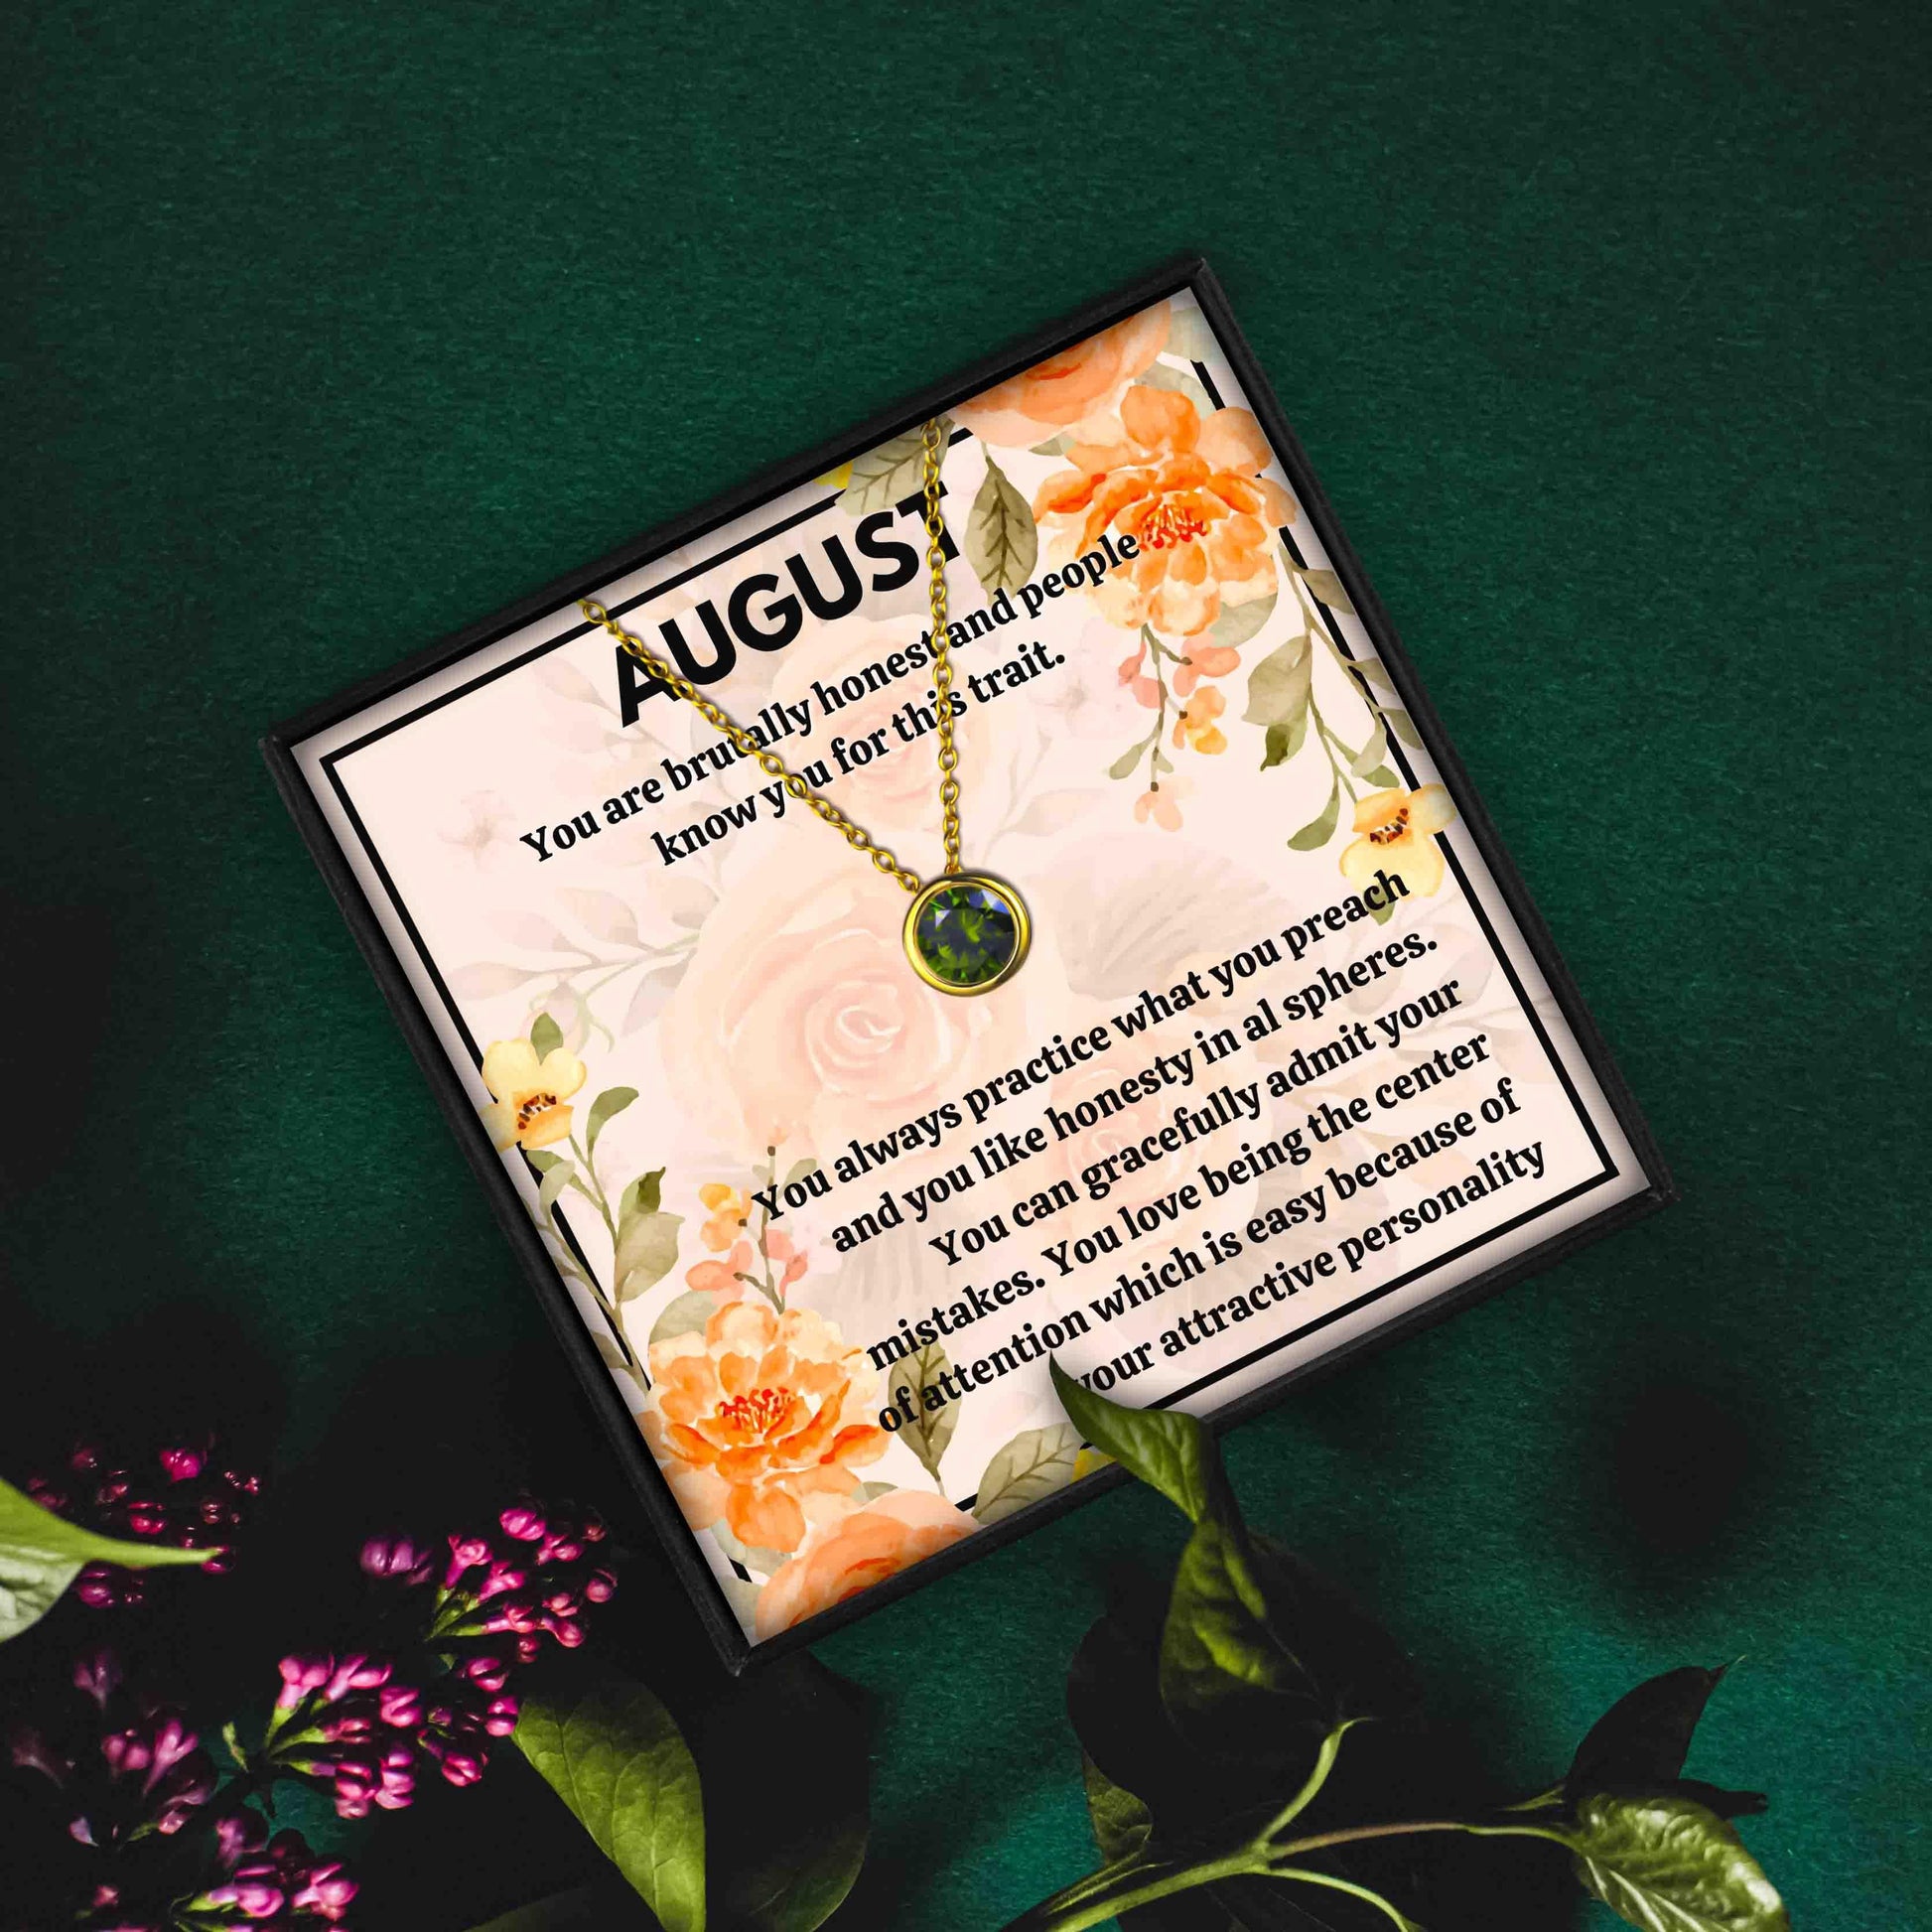 Meaningful August Birthstone Necklace Gift Set for Christmas 2023 | Meaningful August Birthstone Necklace Gift Set - undefined | august birthstone, august birthstone color, august birthstone meaning, august birthstone necklace | From Hunny Life | hunnylife.com